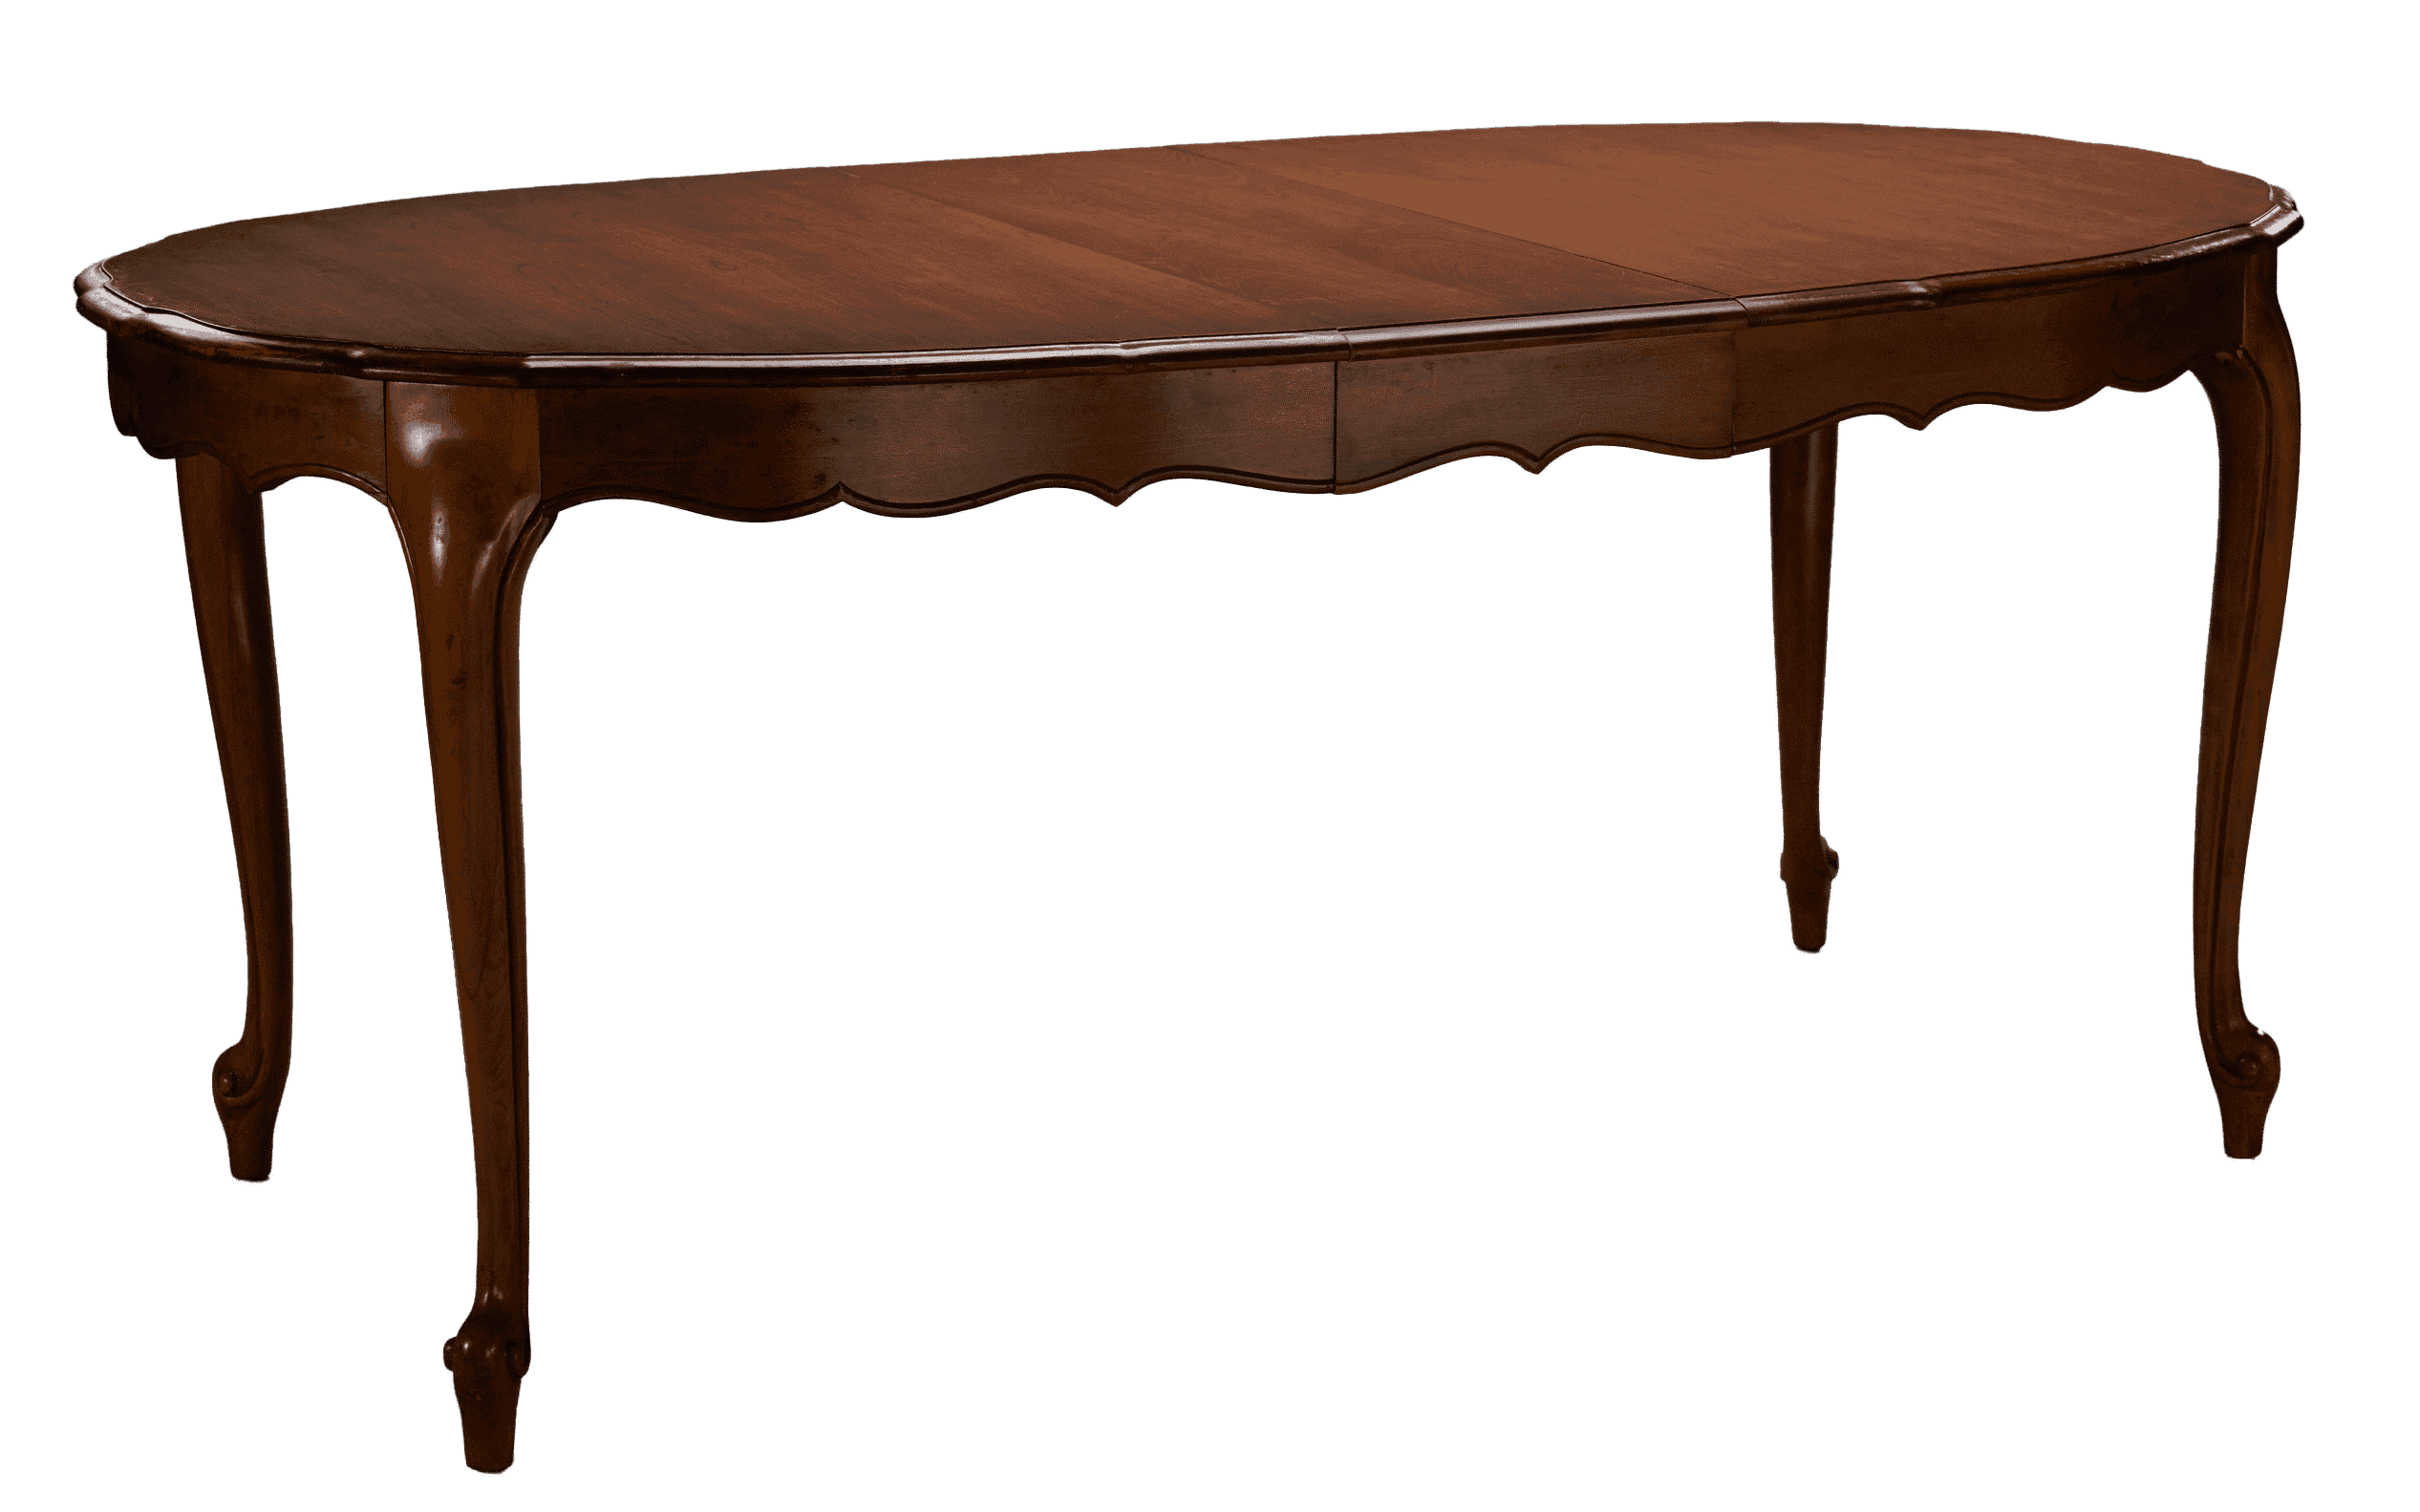 An oval-shaped dark wood dining room table with cabriole legs ending in whorl feet. 